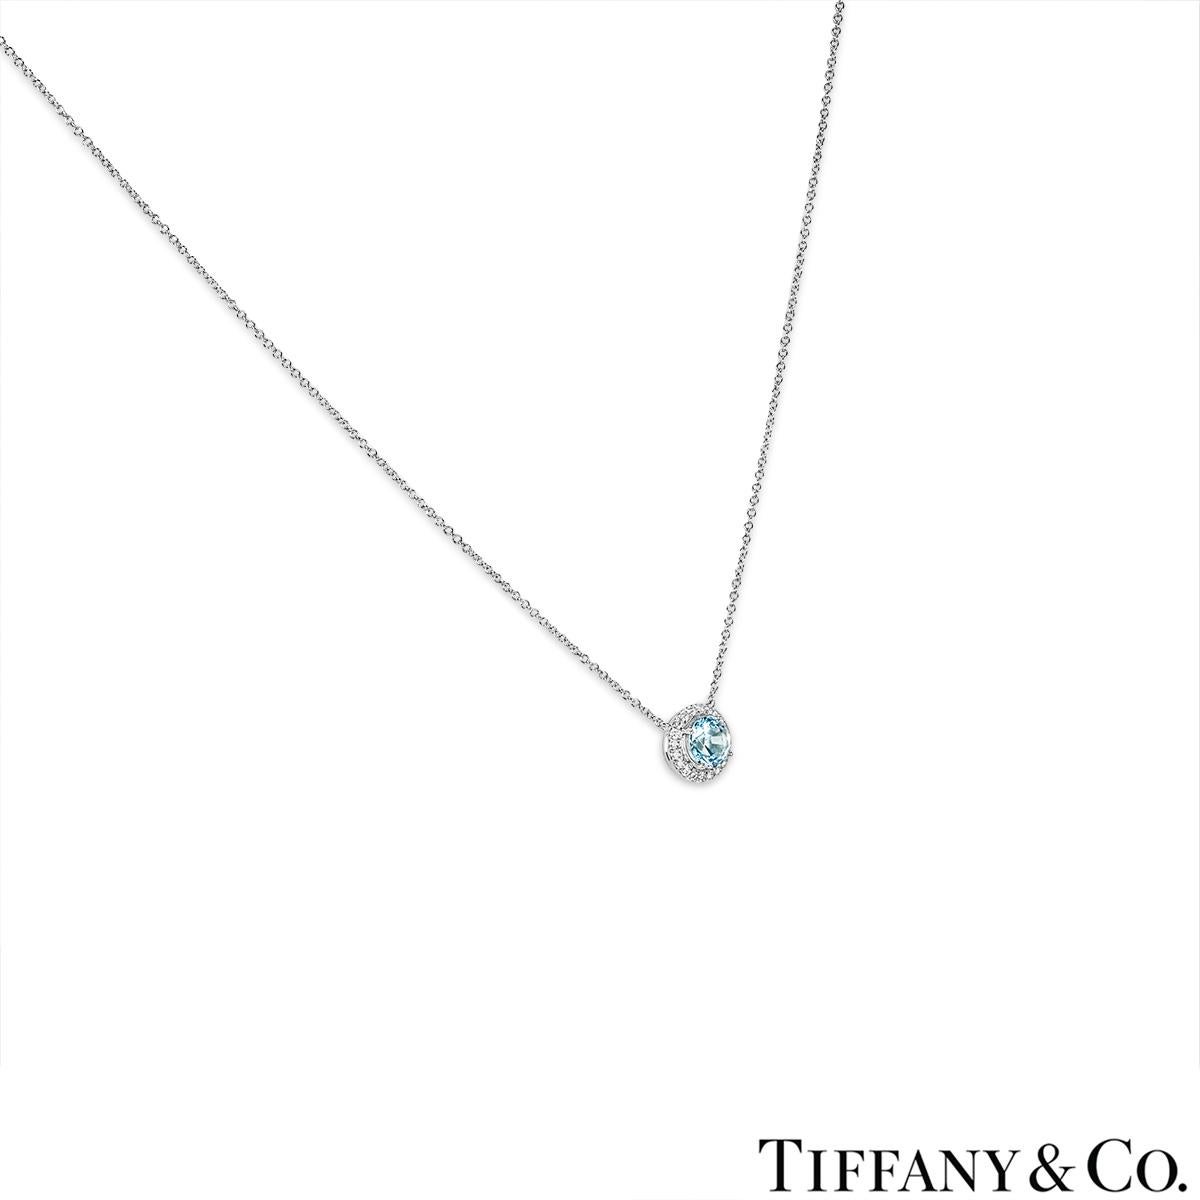 An enchanting platinum aquamarine and diamond pendant by Tiffany & Co. from the Soleste collection. The pendant features an aquamarine set to the centre in a four prong mount with an approximate weight of 0.75ct, displaying an even light blue hue.